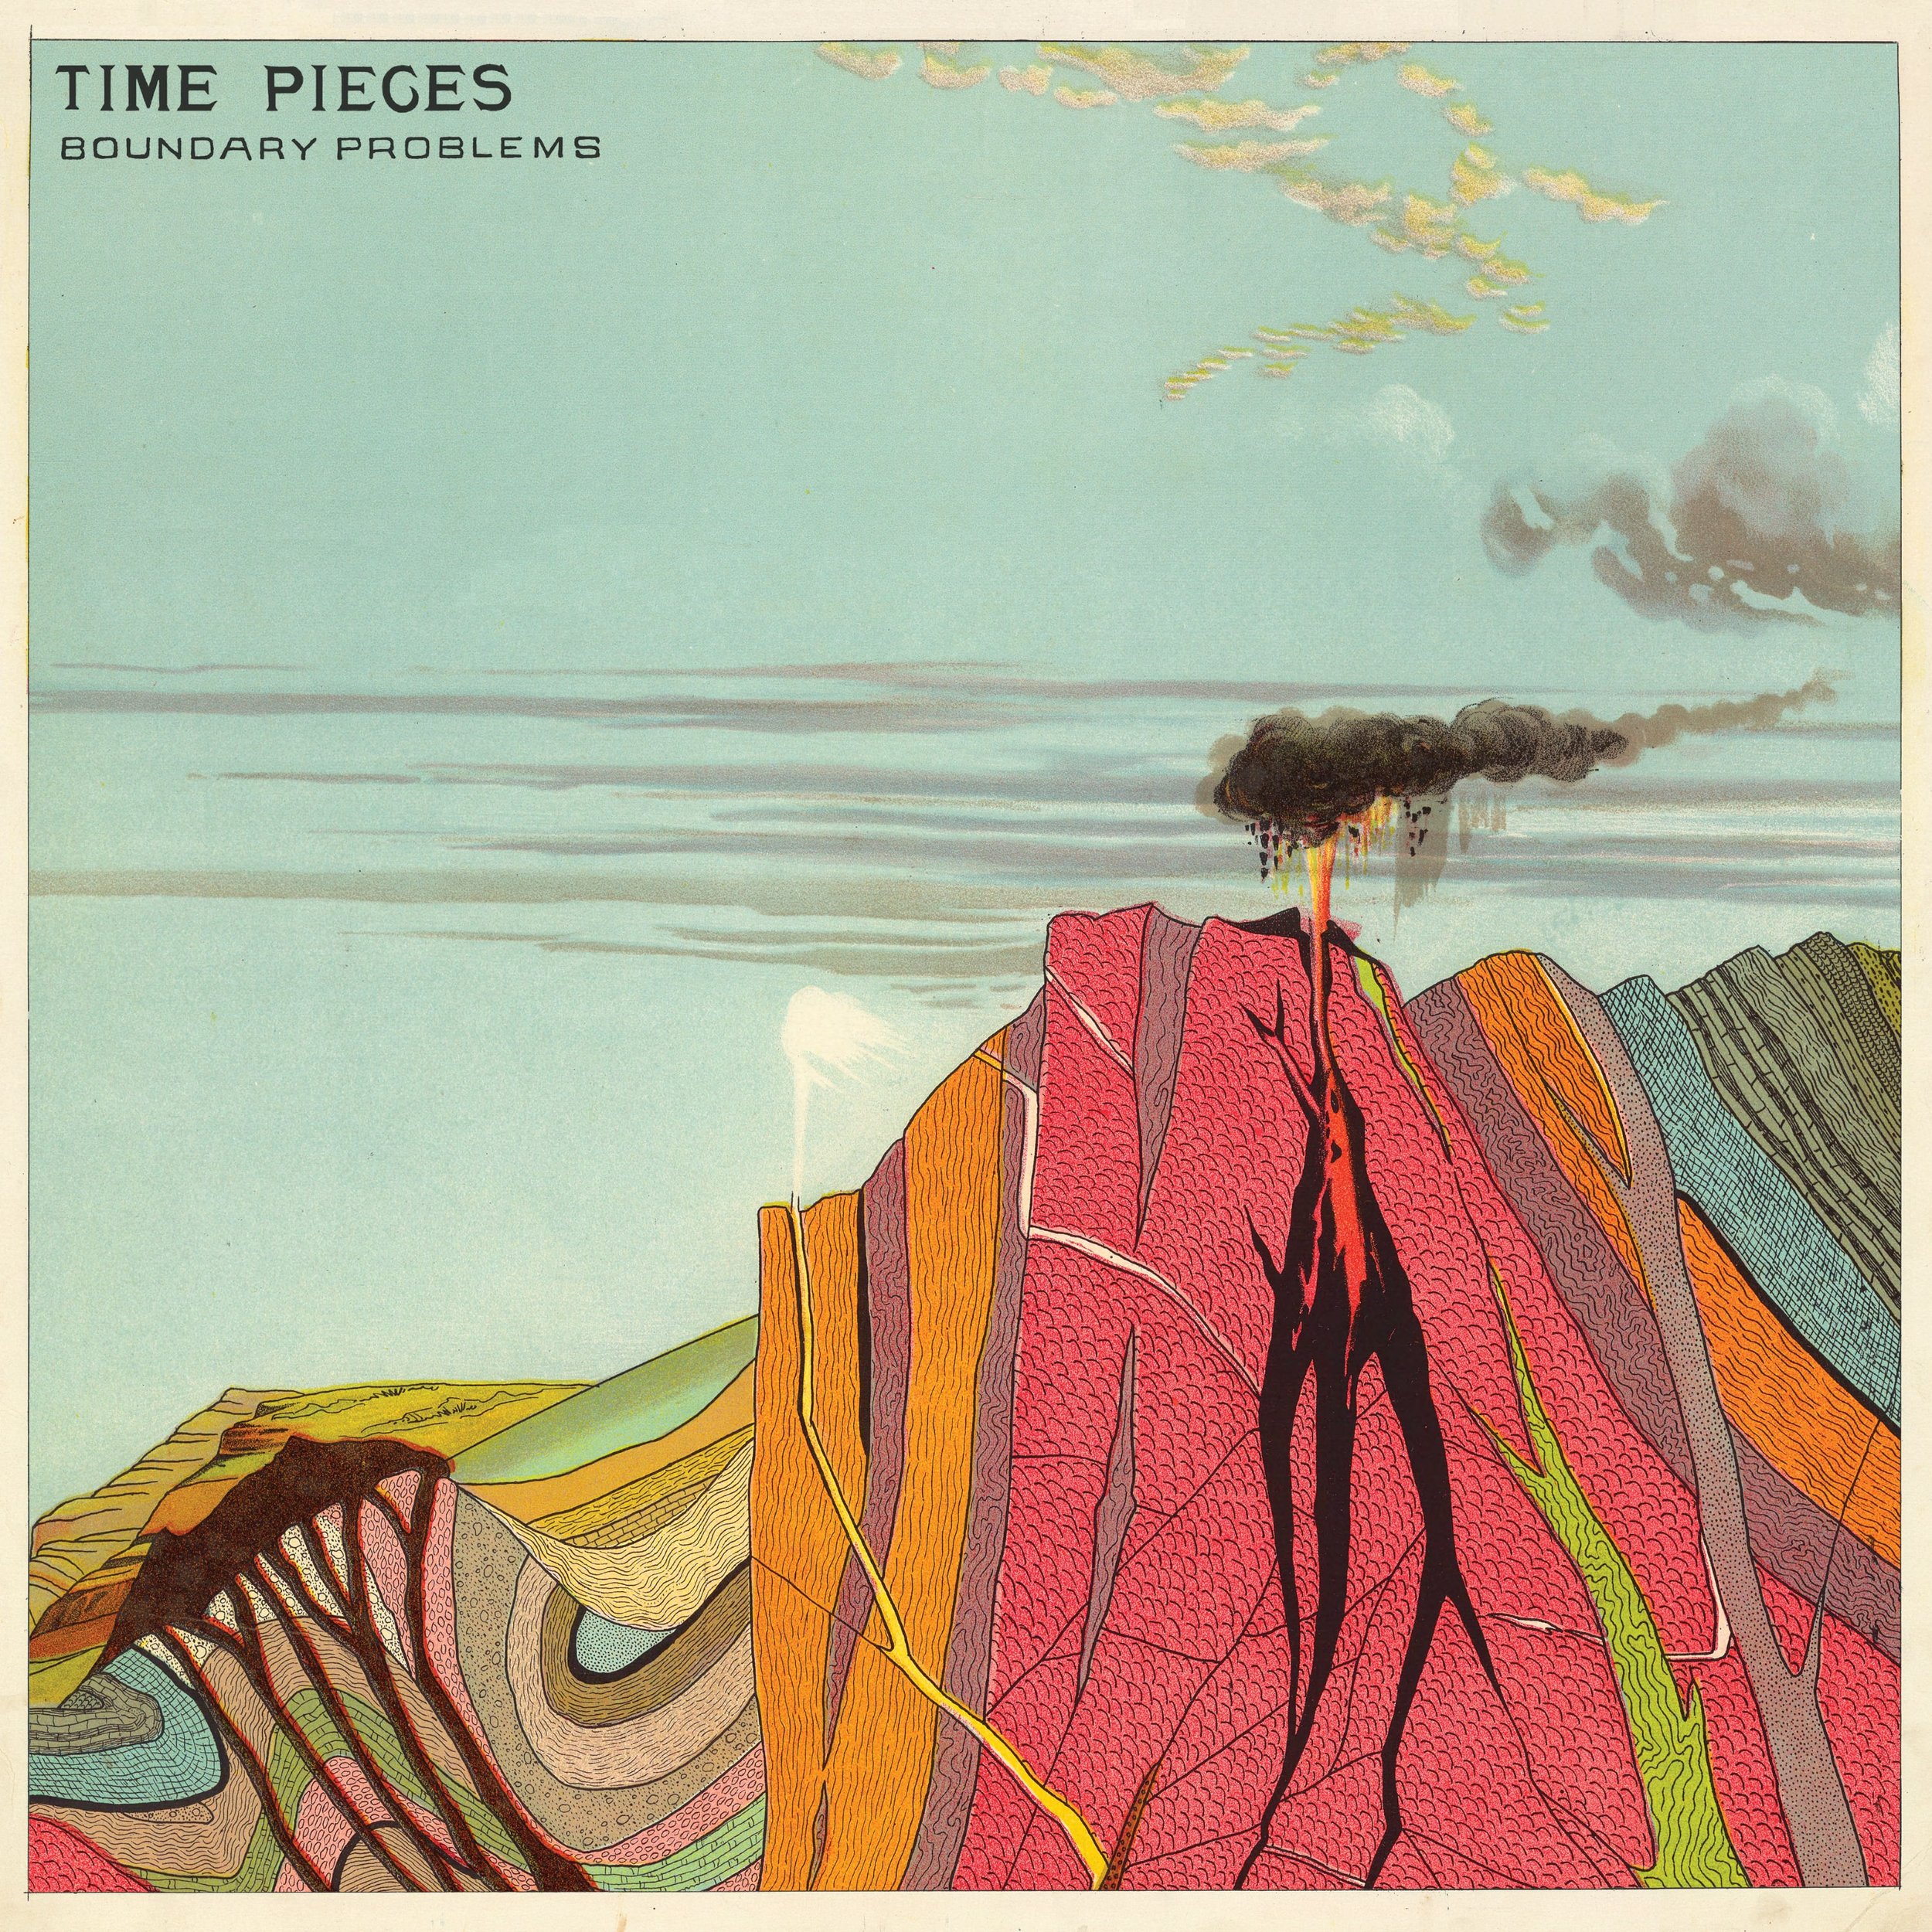 Time Pieces - Boundary Problems - Cover.jpg